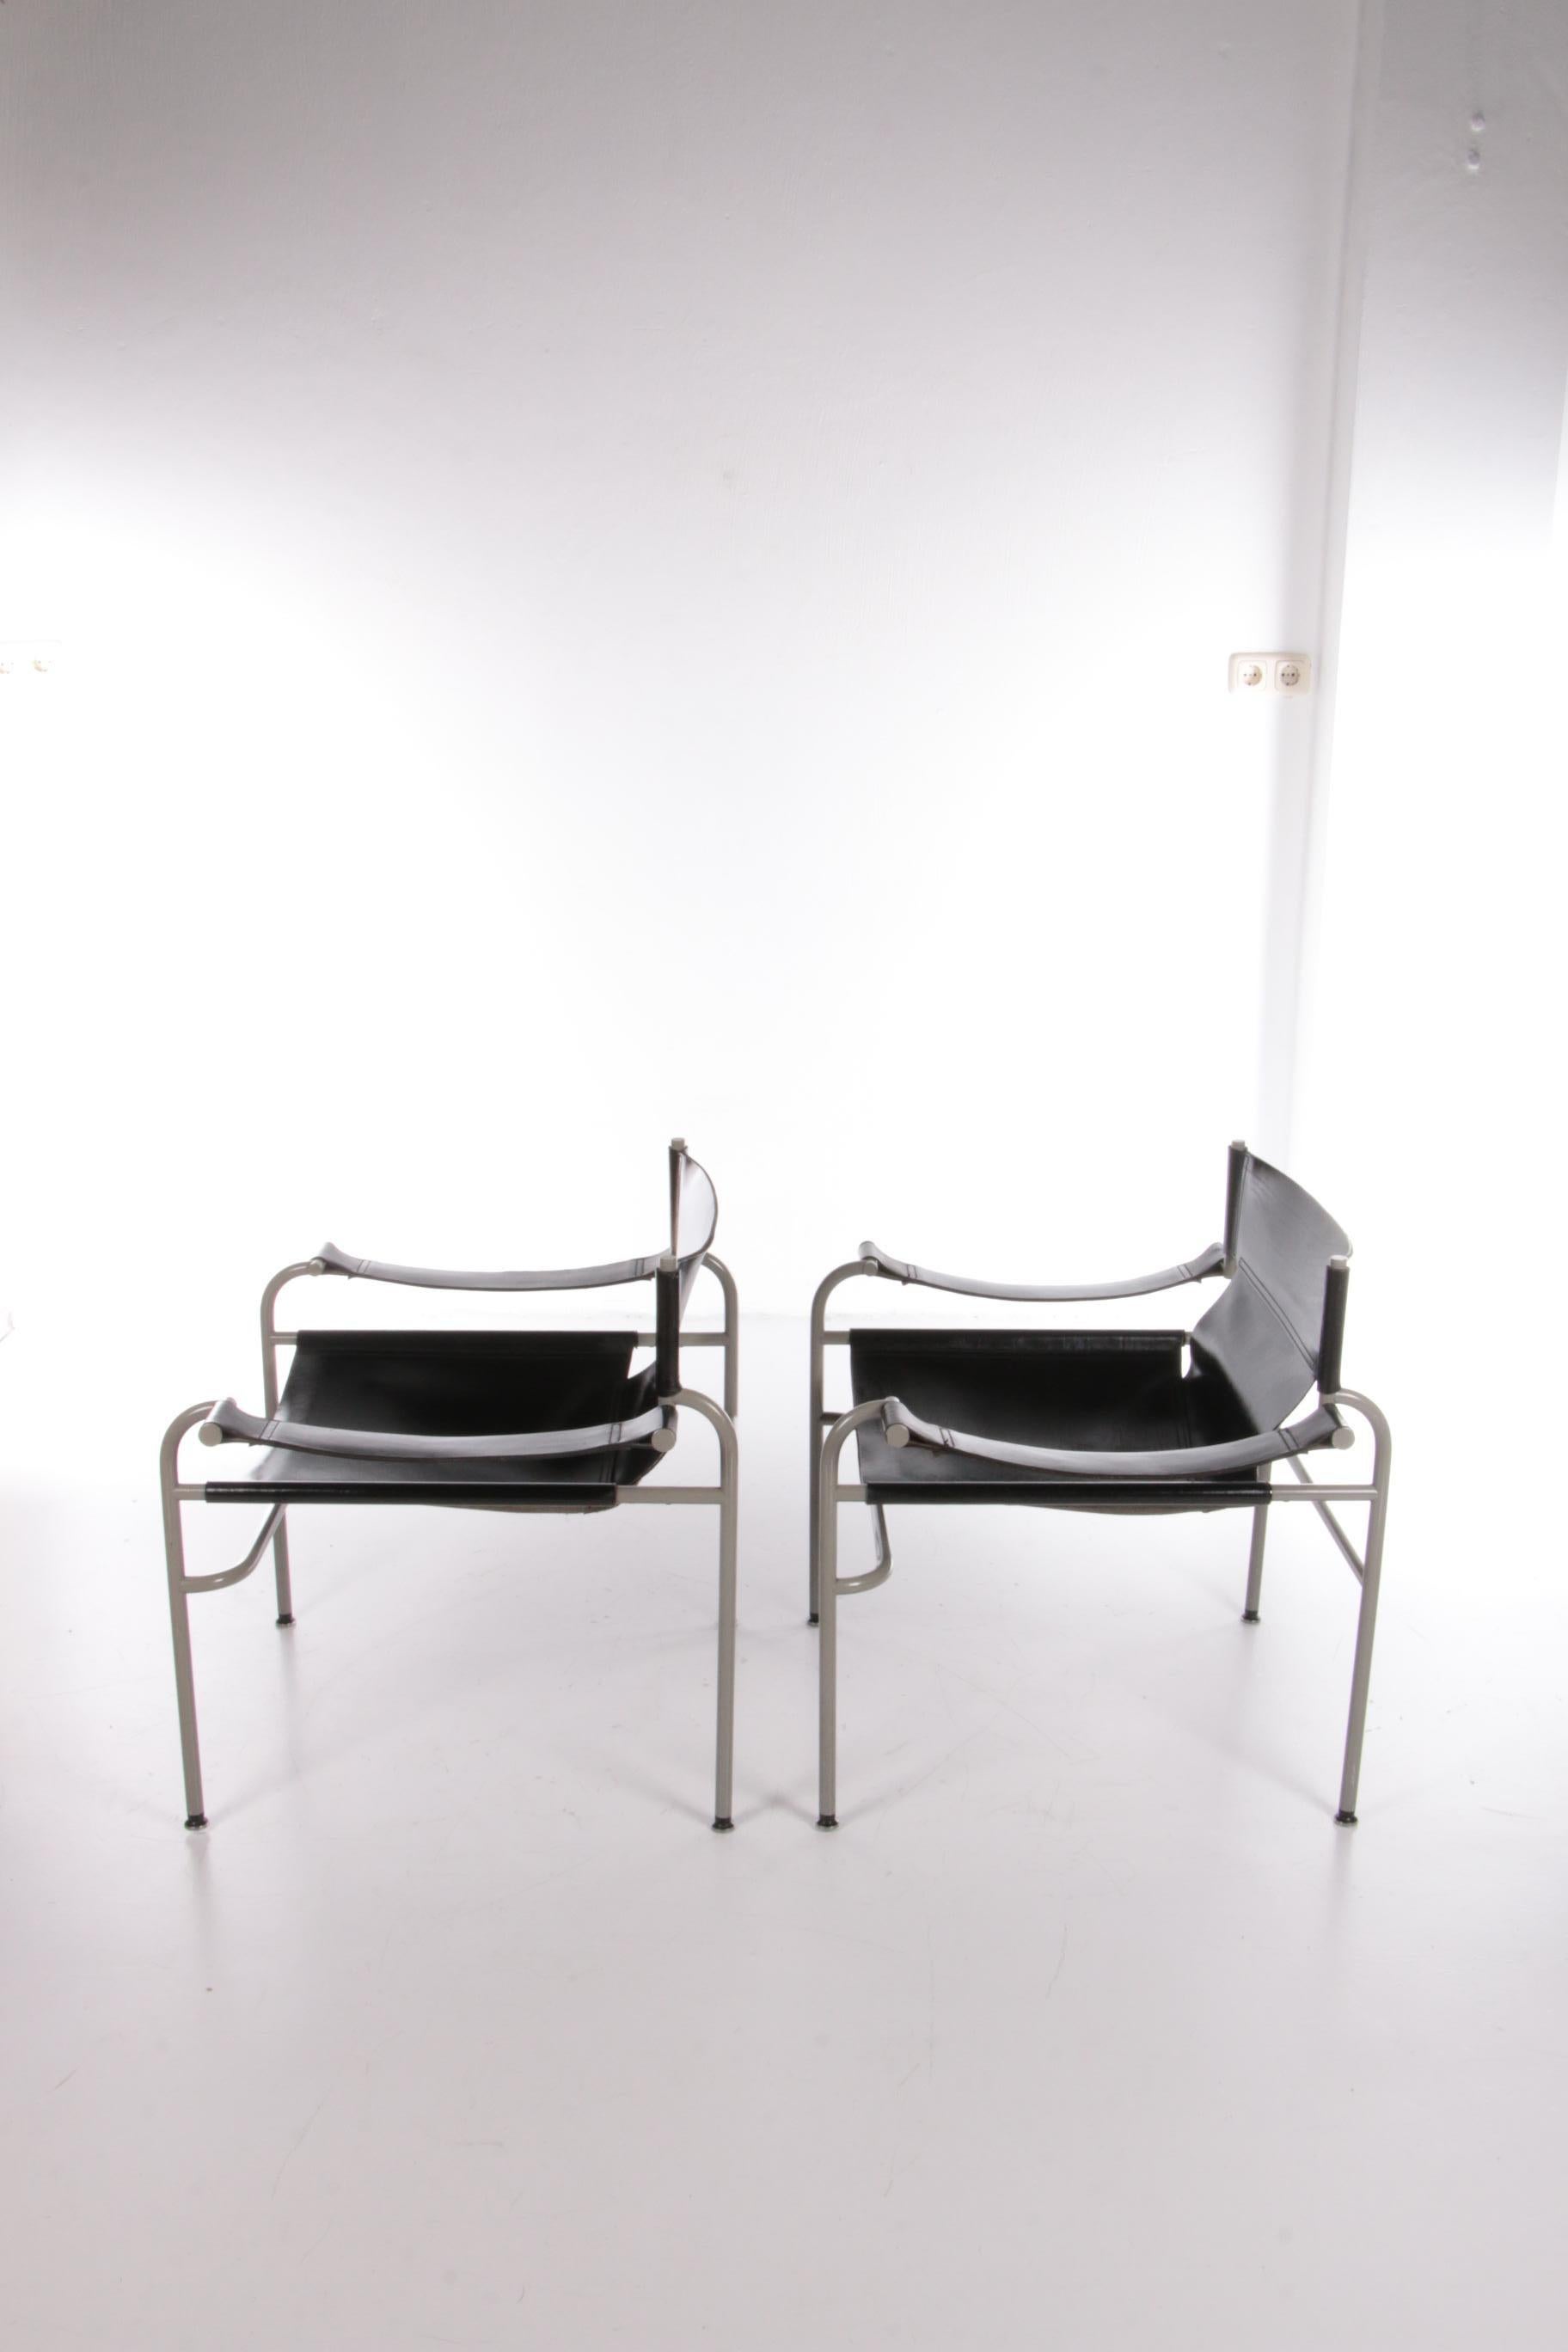 Metal Walter Antonis Set of 2 Saddle Leather Armchairs Made by 't Spectrum, 1970